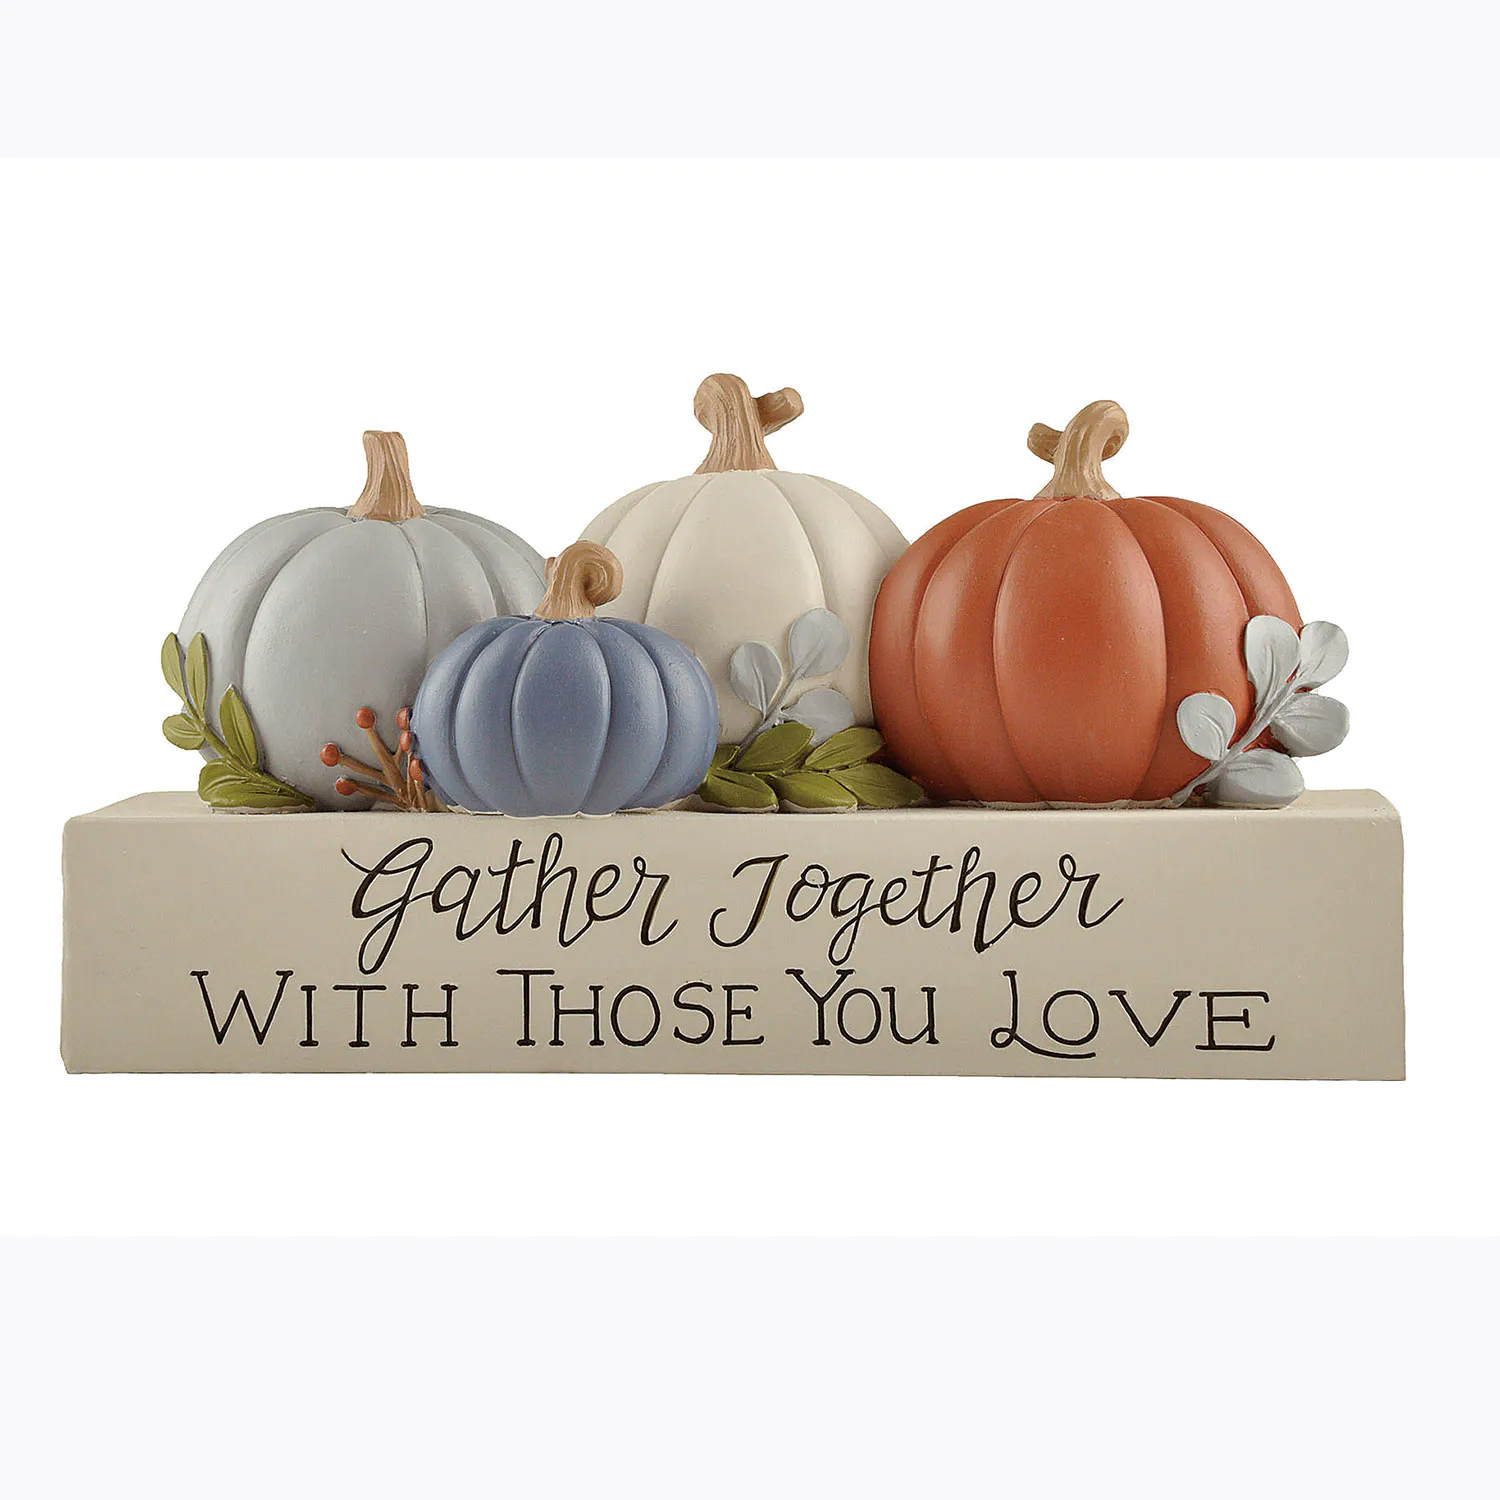 Autumn Embrace Handcrafted Resin Pumpkin Four Pumpkins on Base Collection with Inspirational Message236-13854